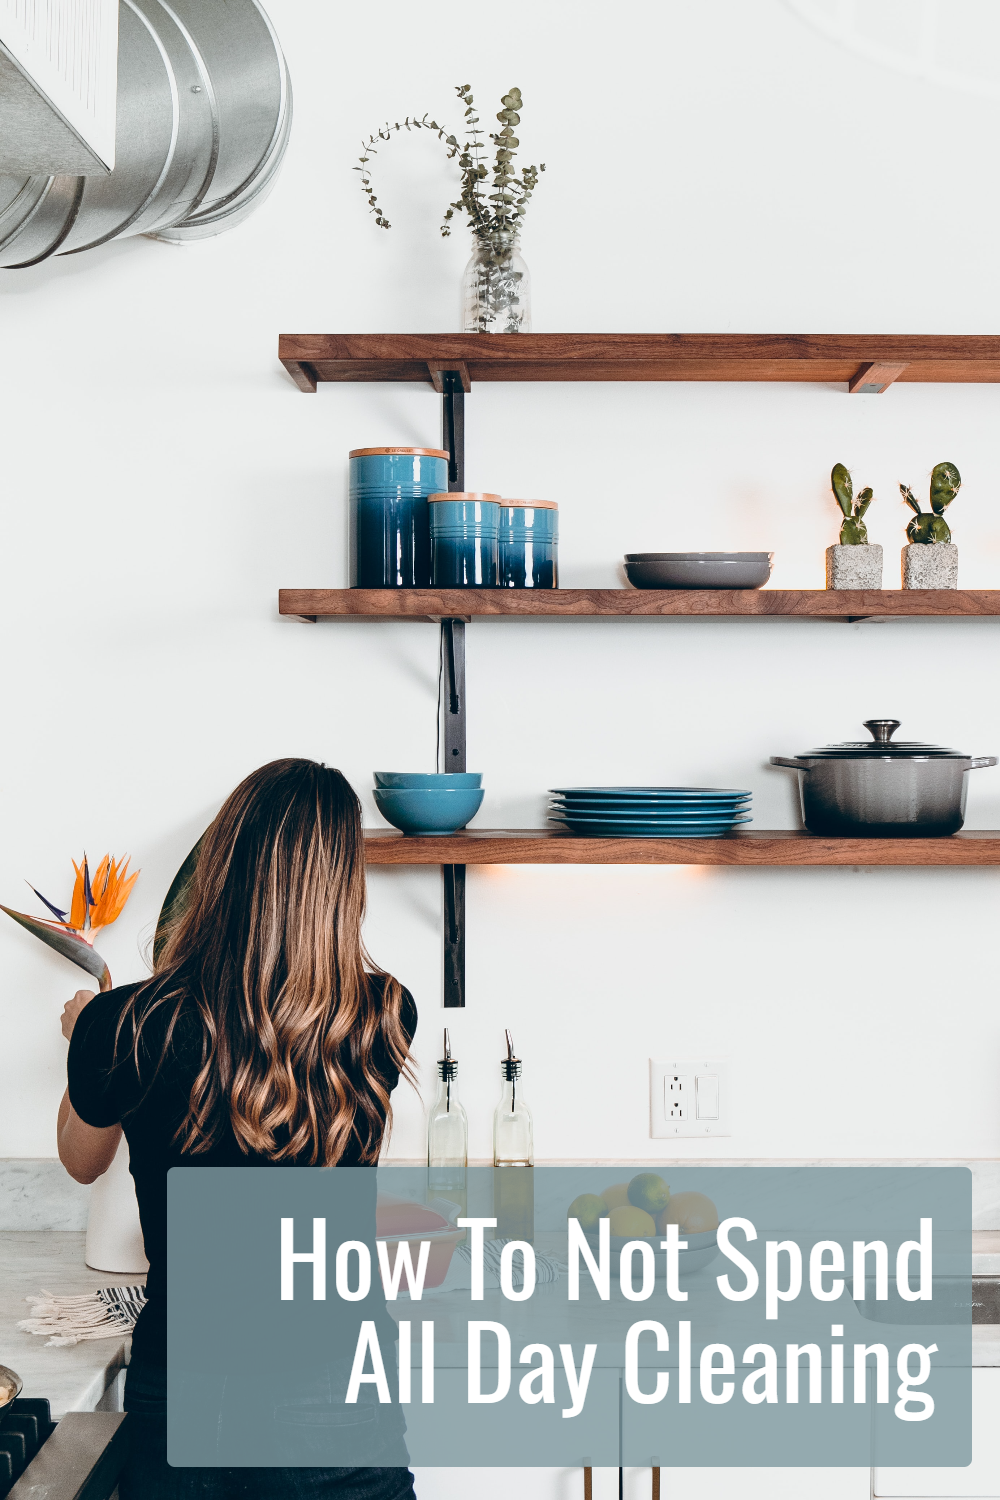 Want a tidy house but to not spend all day cleaning? Take these 4 practical steps to spend less time cleaning up and more time on important things!